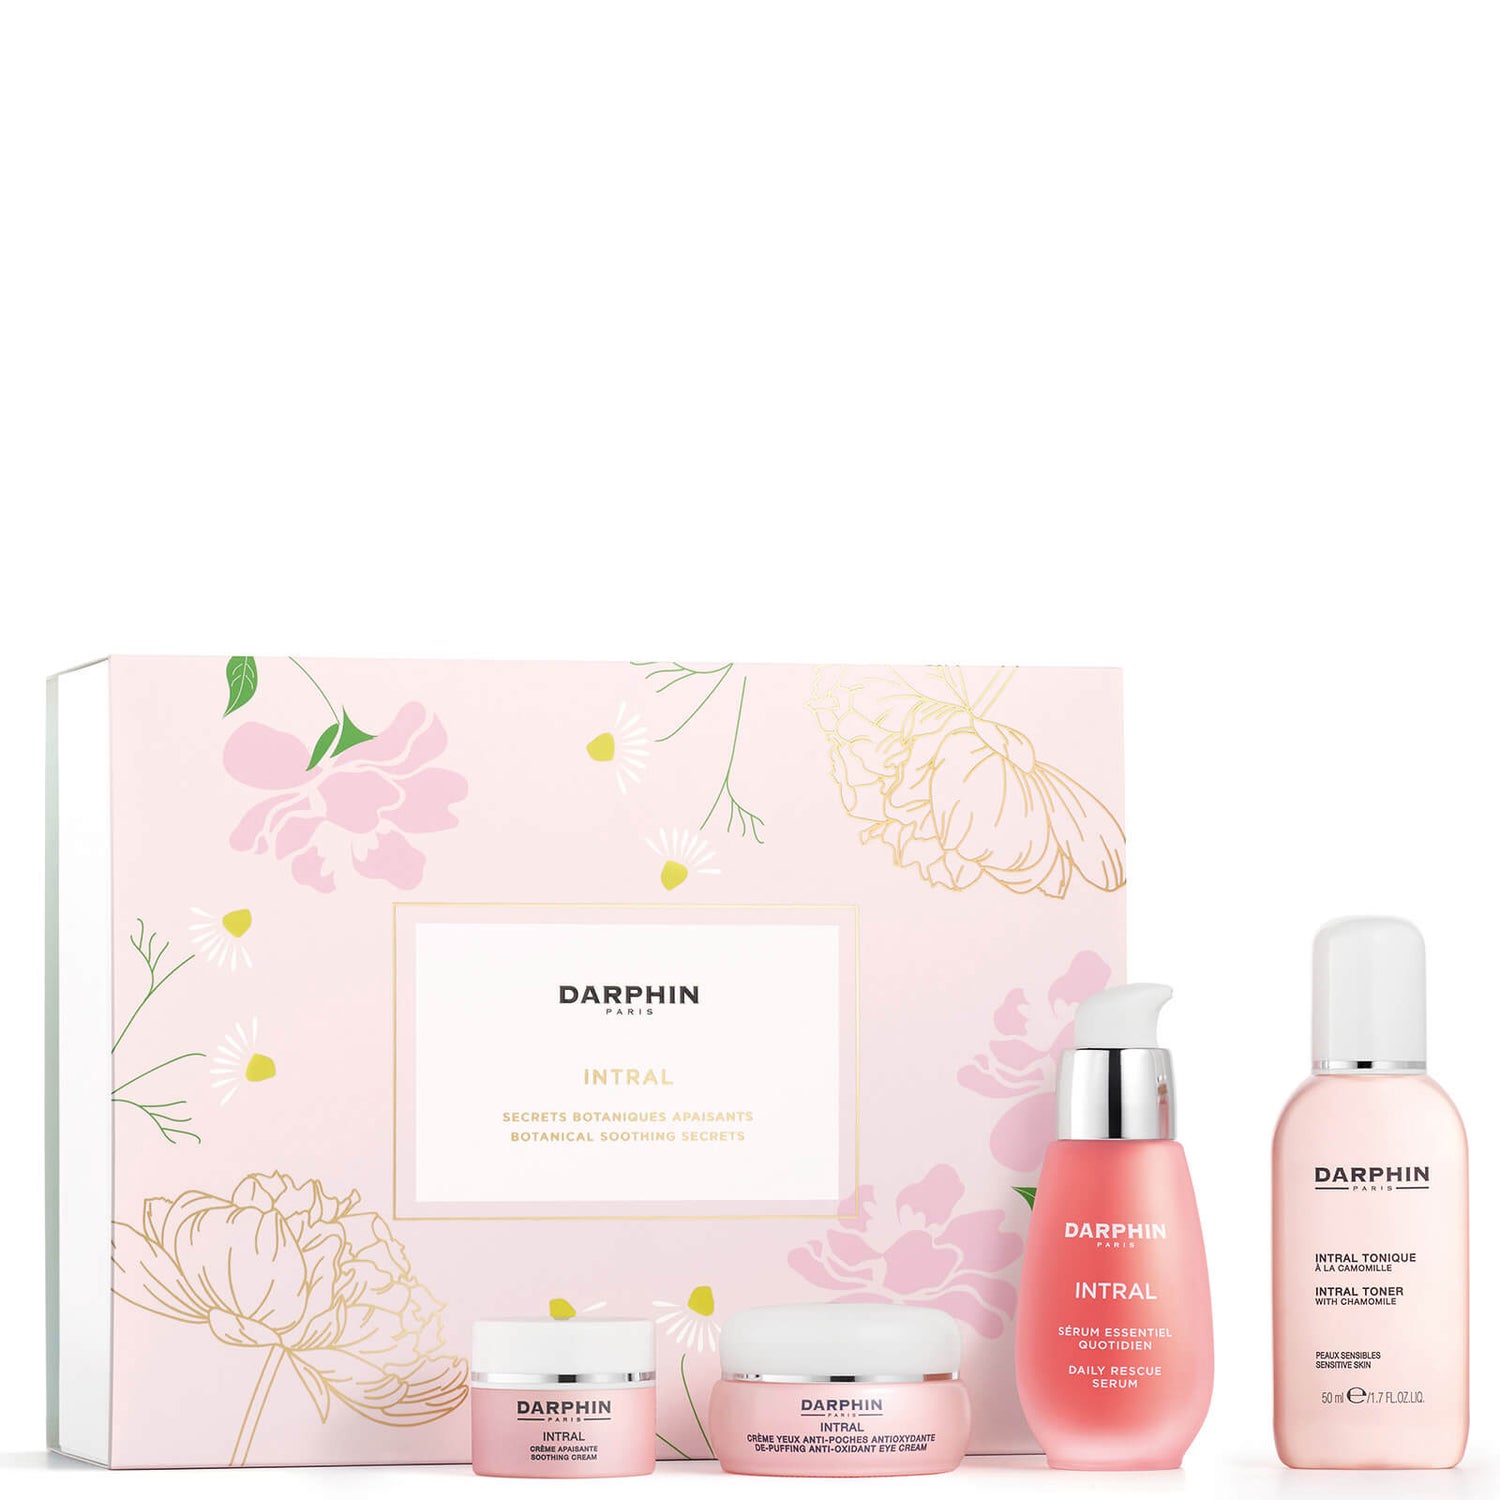 Darphin Intral Botanical Soothing Secrets Set